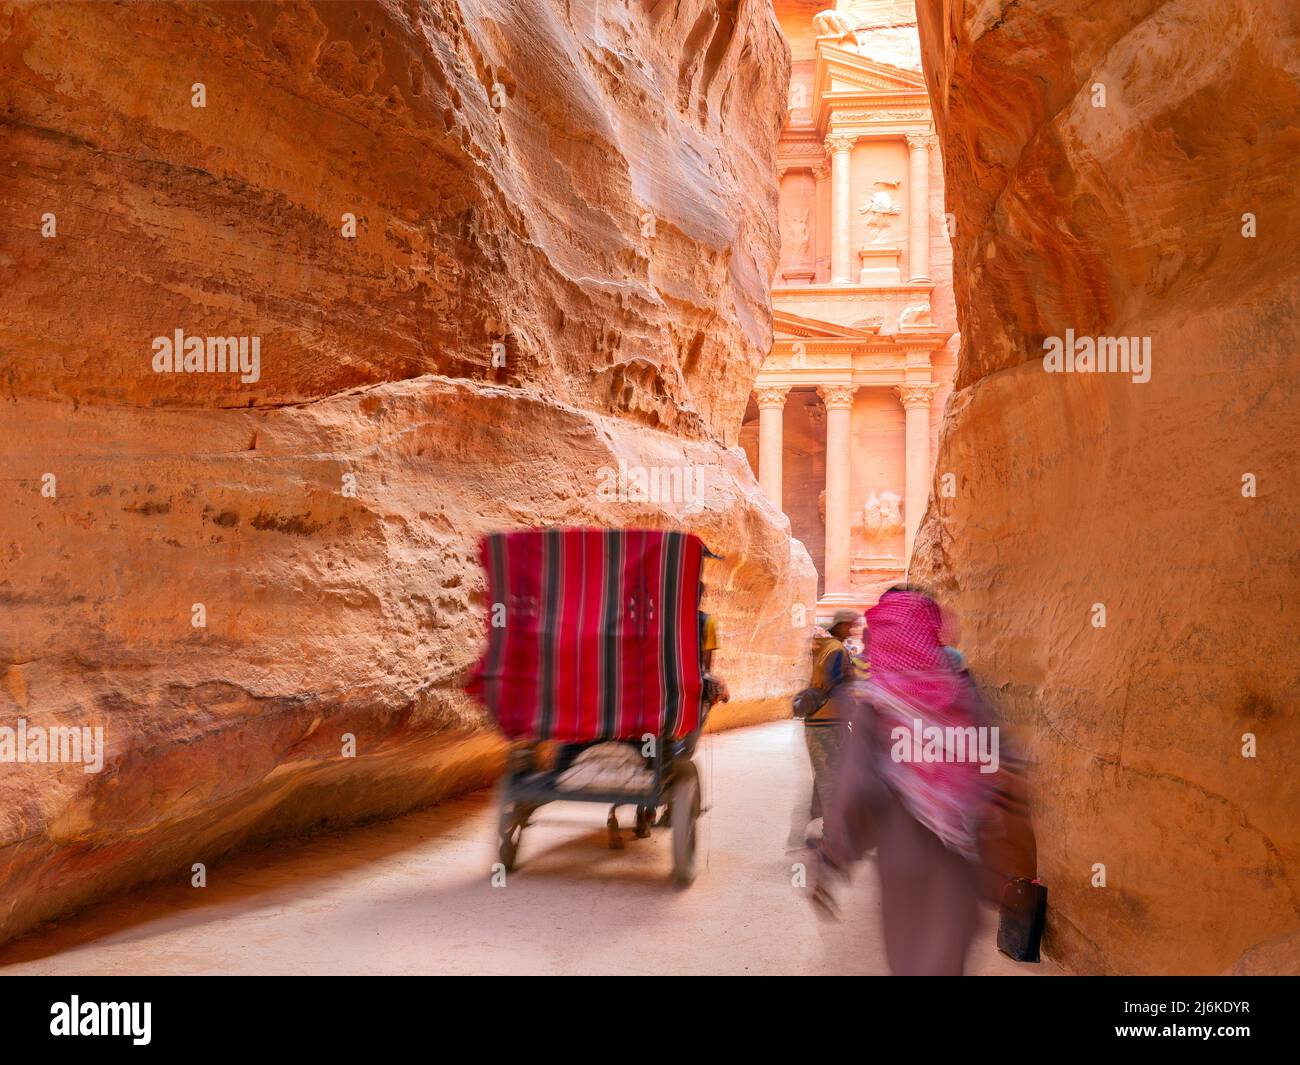 people in a horse carriage in a gorge, Siq canyon in Petra, Jordan. Petra is one of the New Seven Wonders of the World. Stock Photo